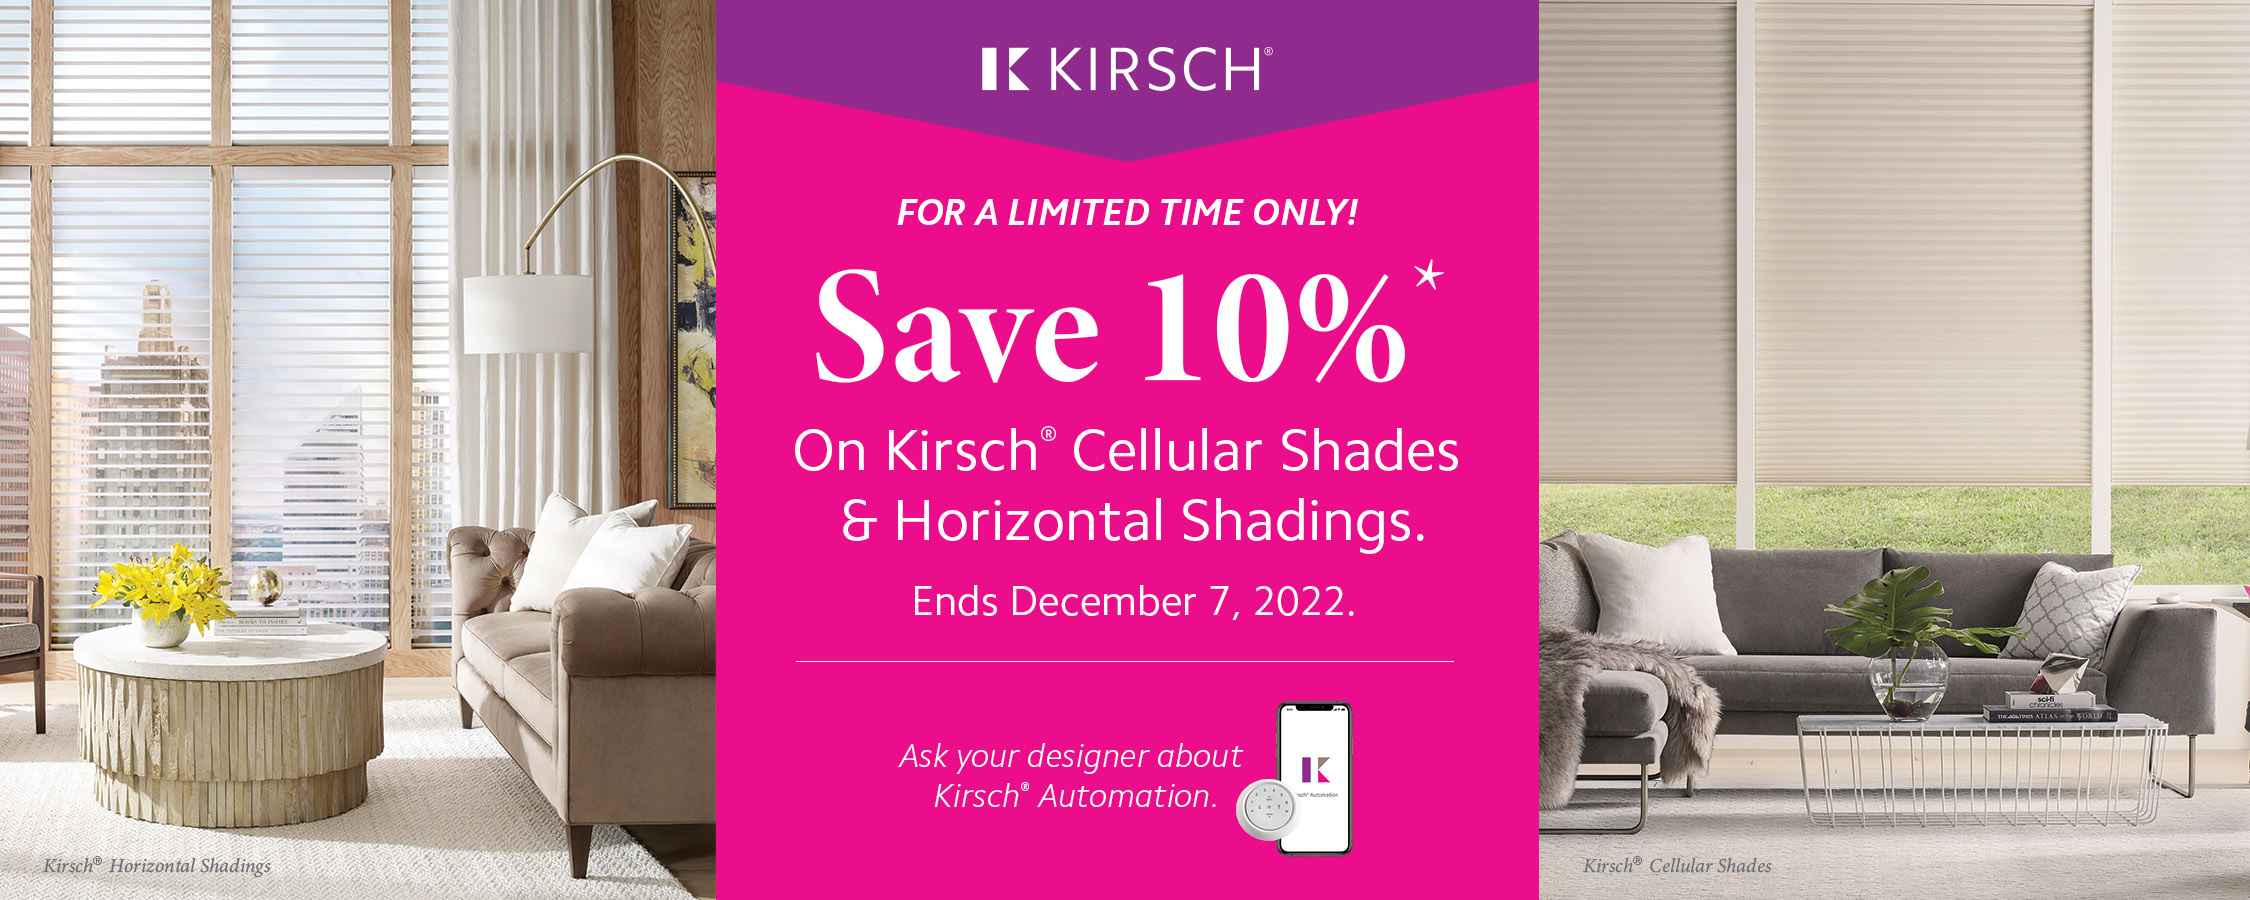 For limited time only save 10% on Kirsch cellular shades & horizontal shadings